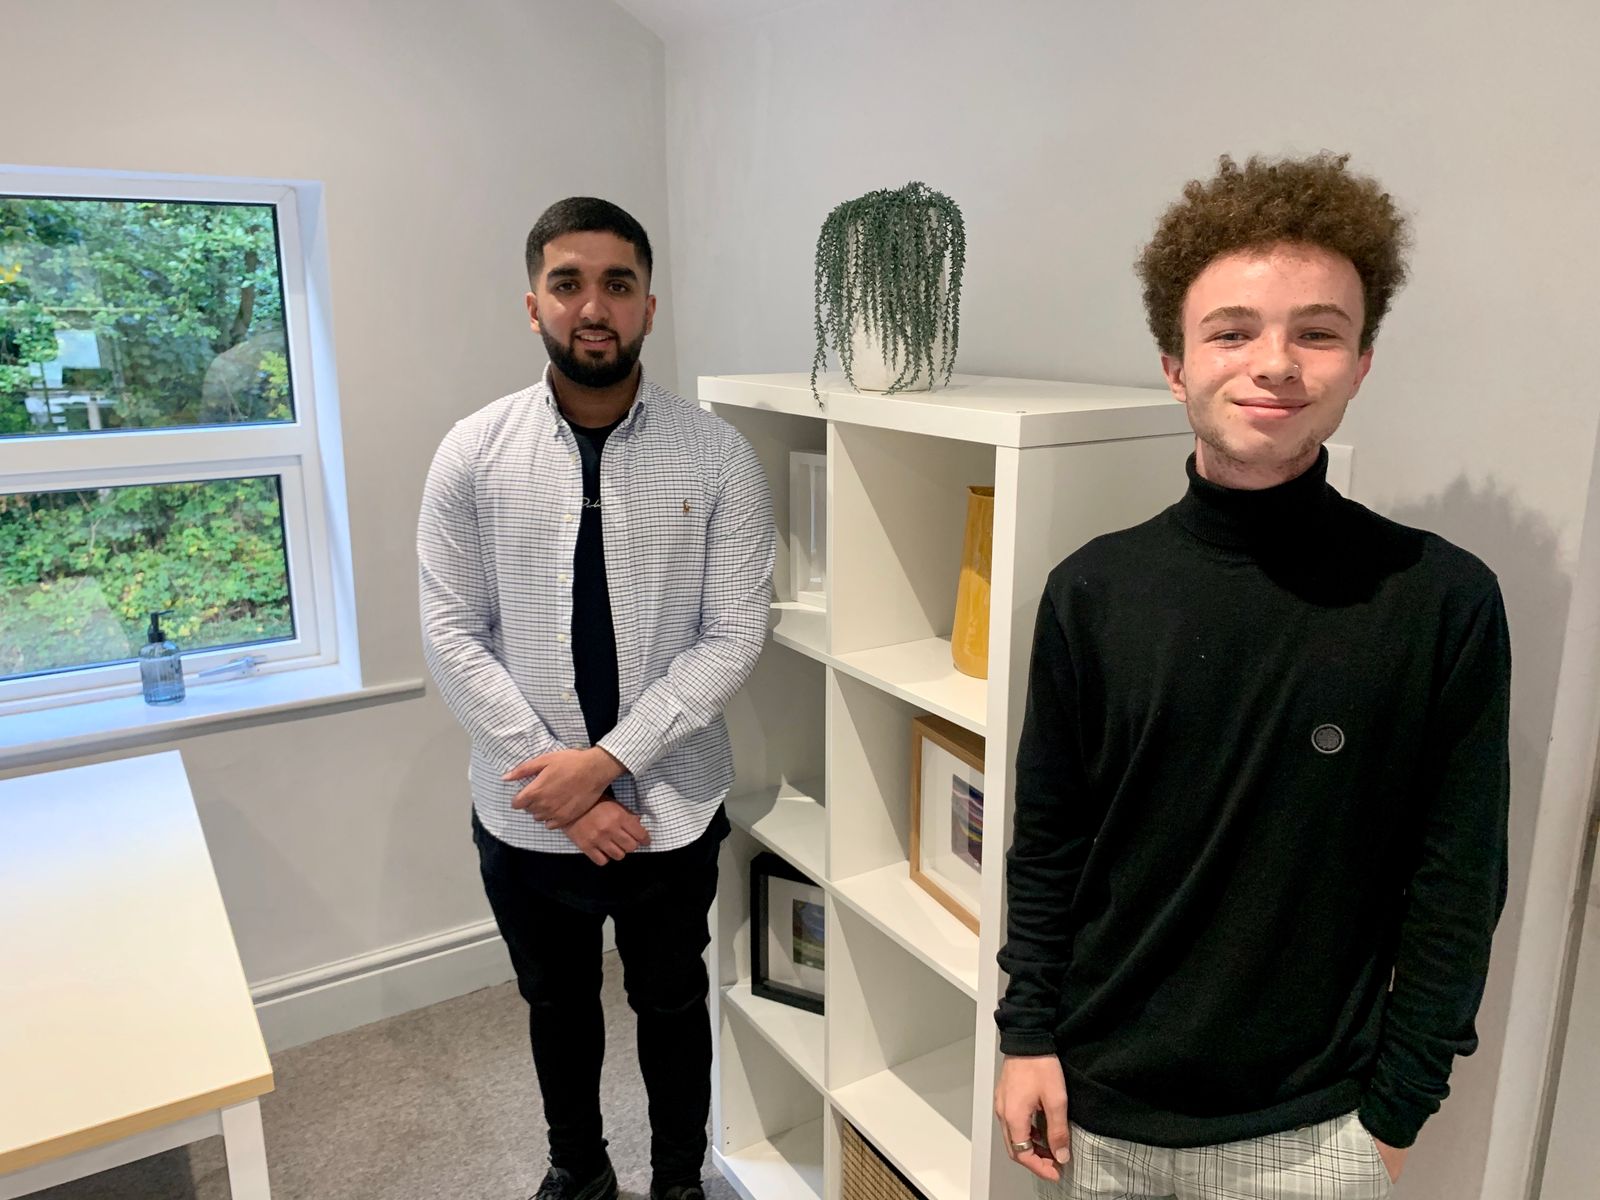 Huddersfield web design agency bucks the trend with two new hires